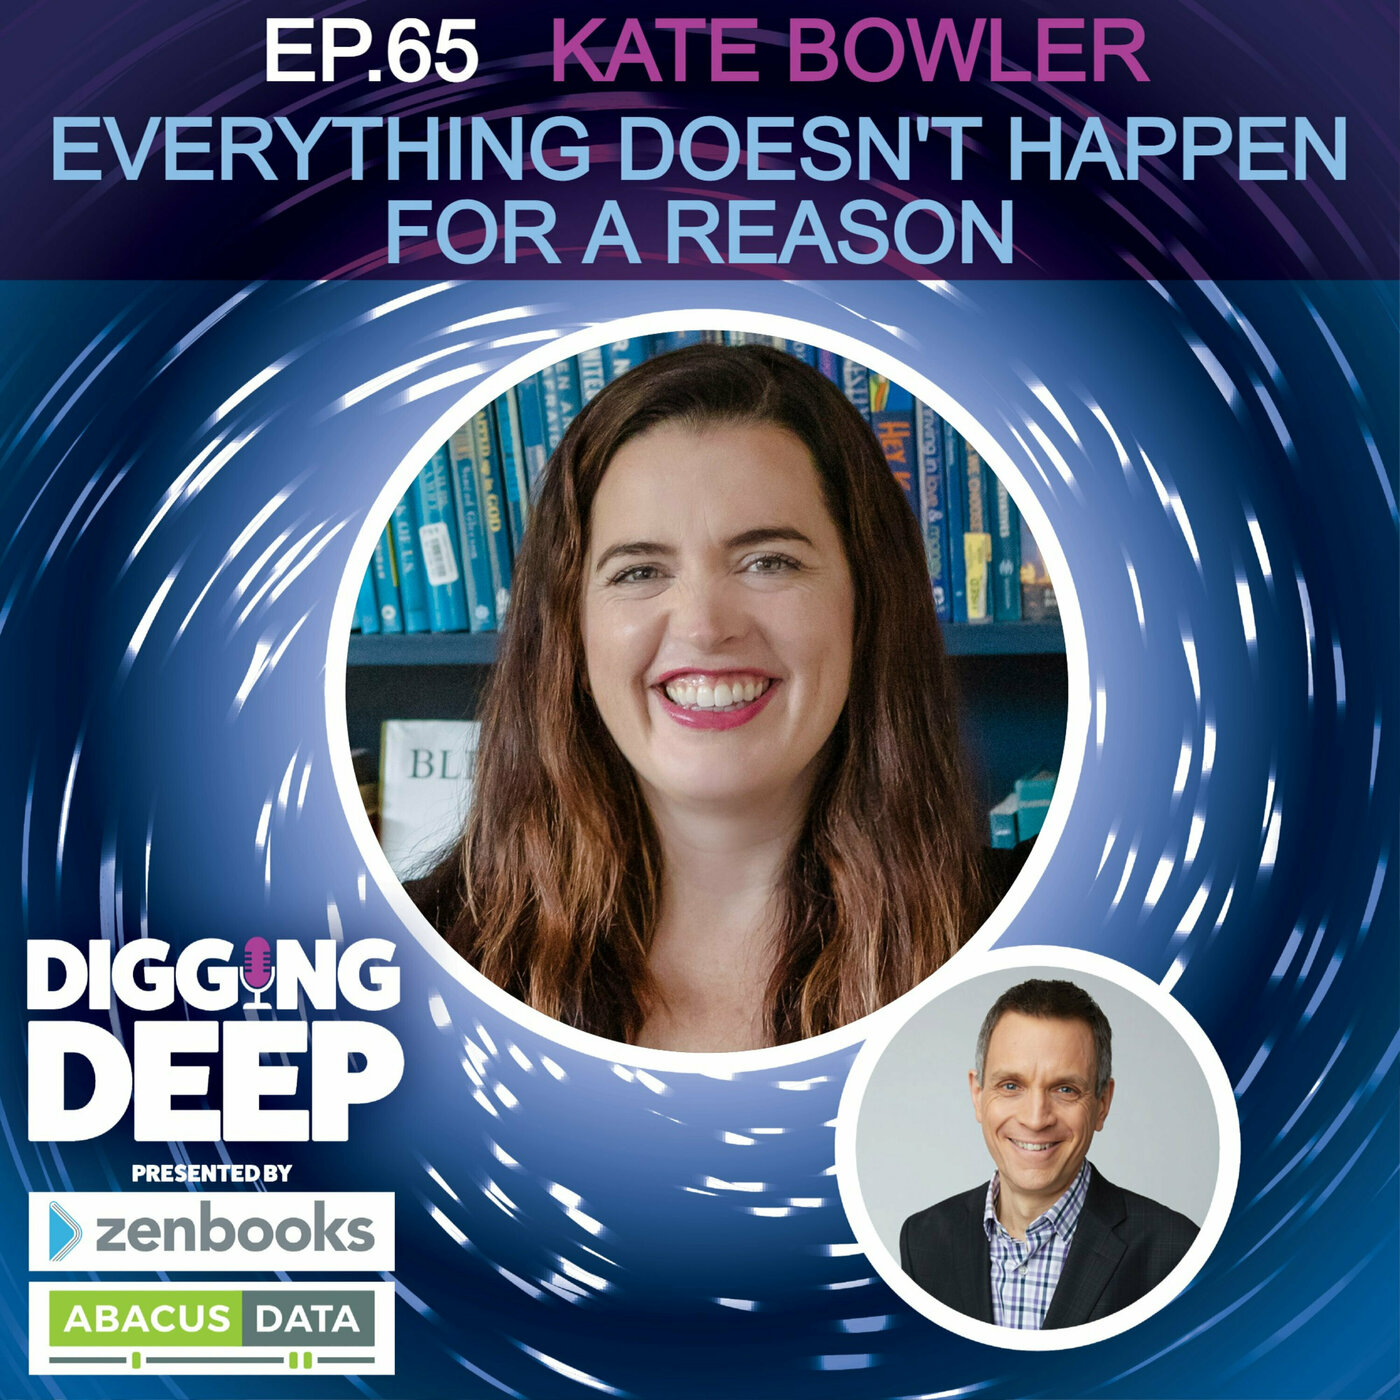 Kate Bowler: Everything Doesn't Happen for a Reason